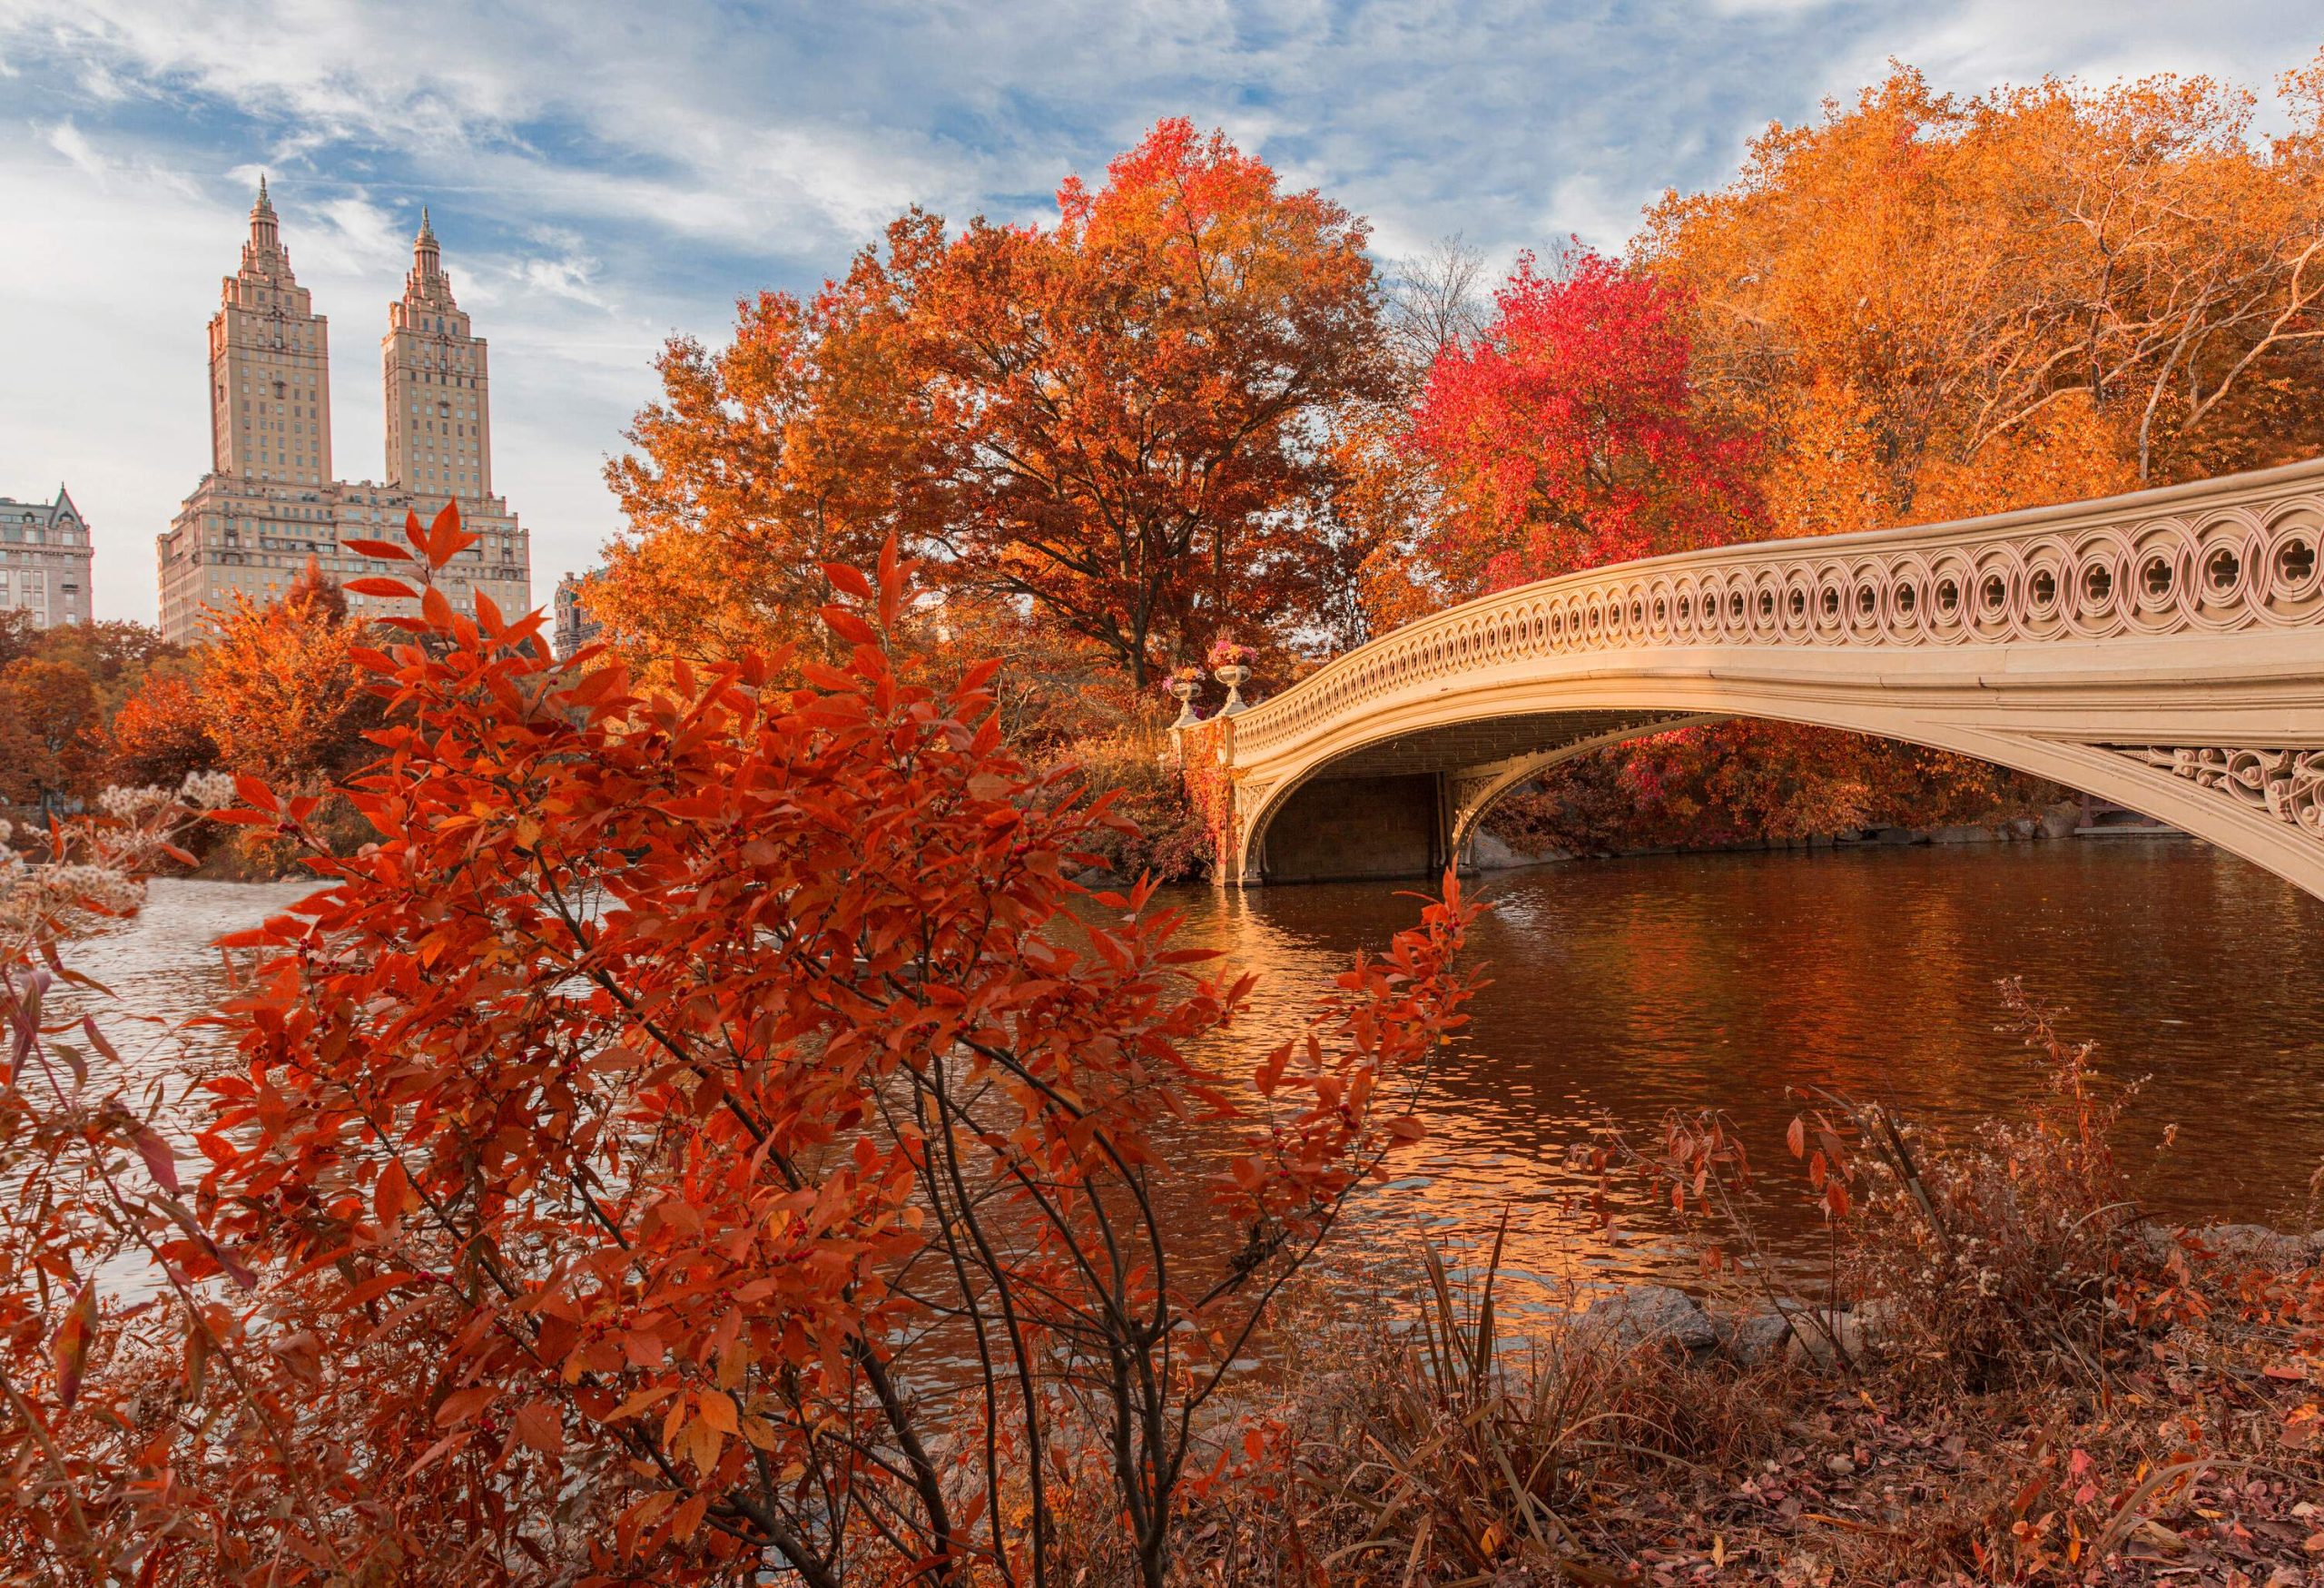 In front of a majestic structure with twin towers, the bow bridge crosses a lake surrounded by lush vegetation.